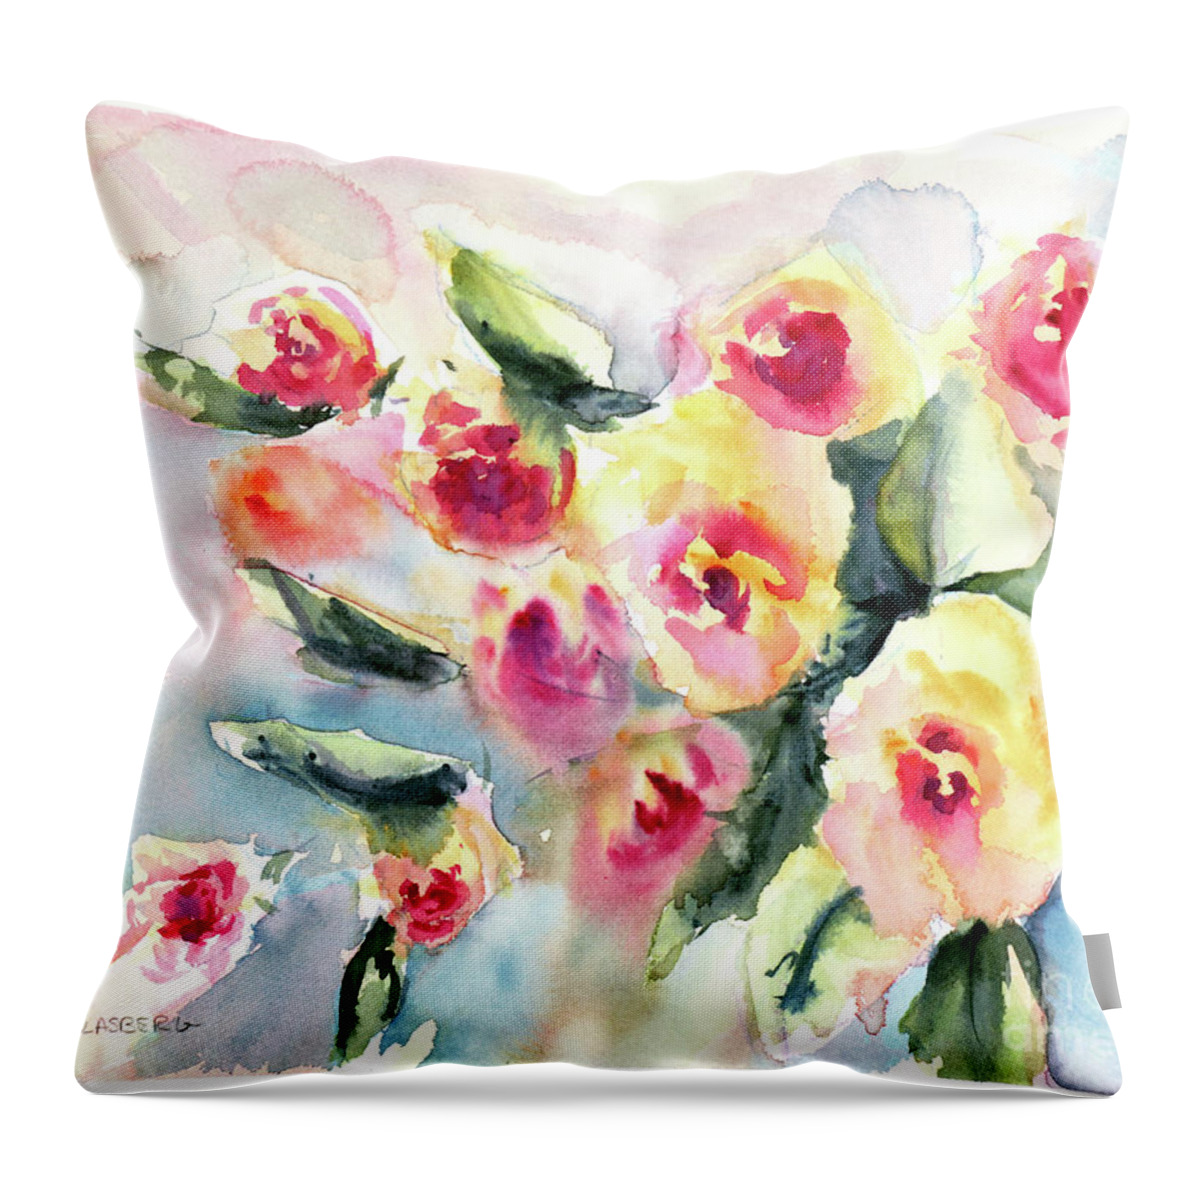 Face Mask Throw Pillow featuring the painting Memories by Lois Blasberg